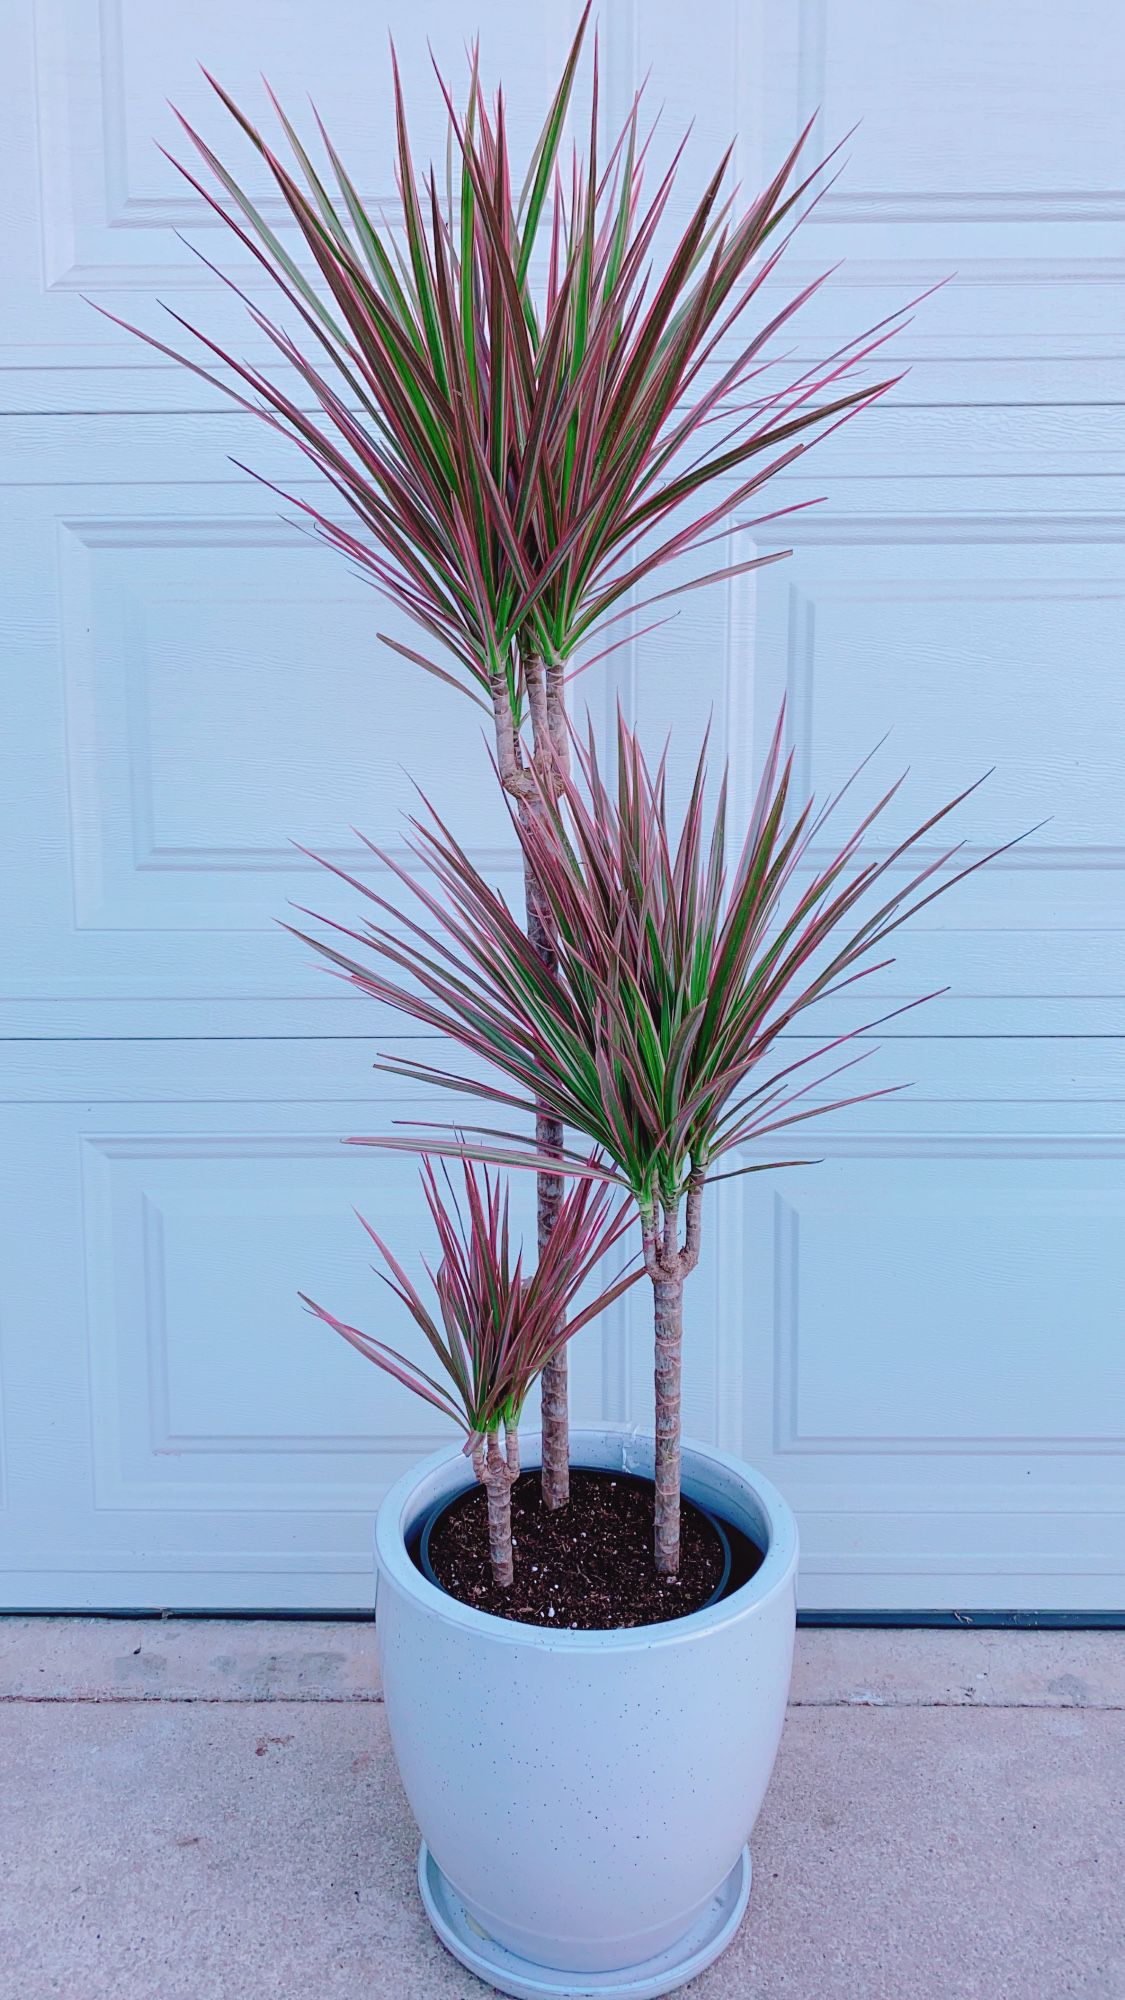 Tricolor Red Marginata Dracaena Plants - 3’10” Tall/2 Gallon Container - Indoor/Outdoor Plant - Ceramic Pot Not Including 